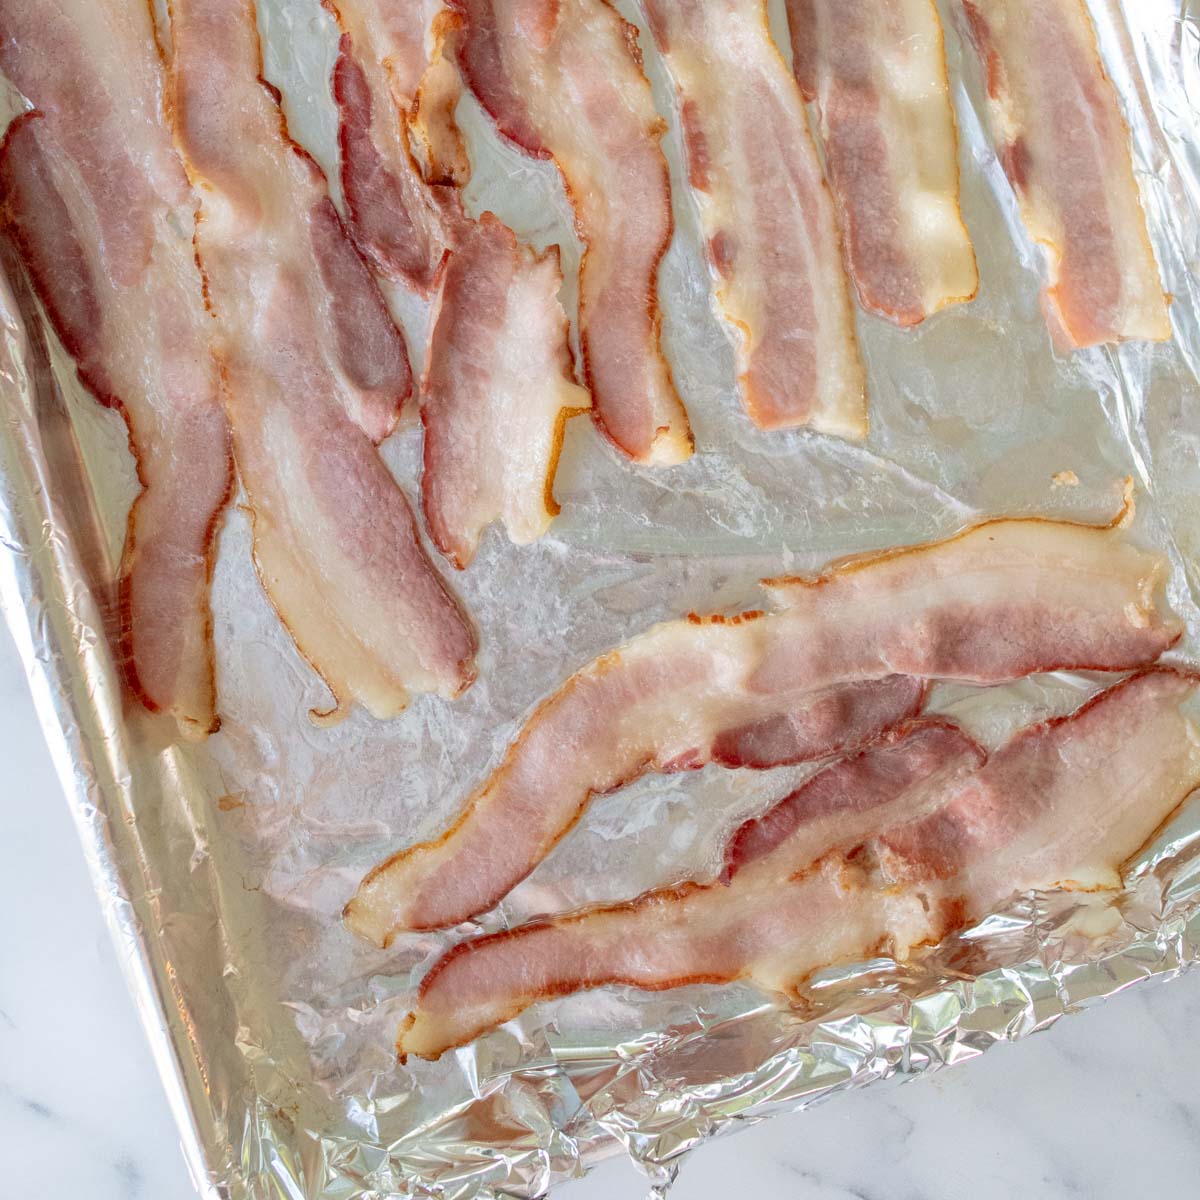 partially cooked bacon on a foil lined sheet